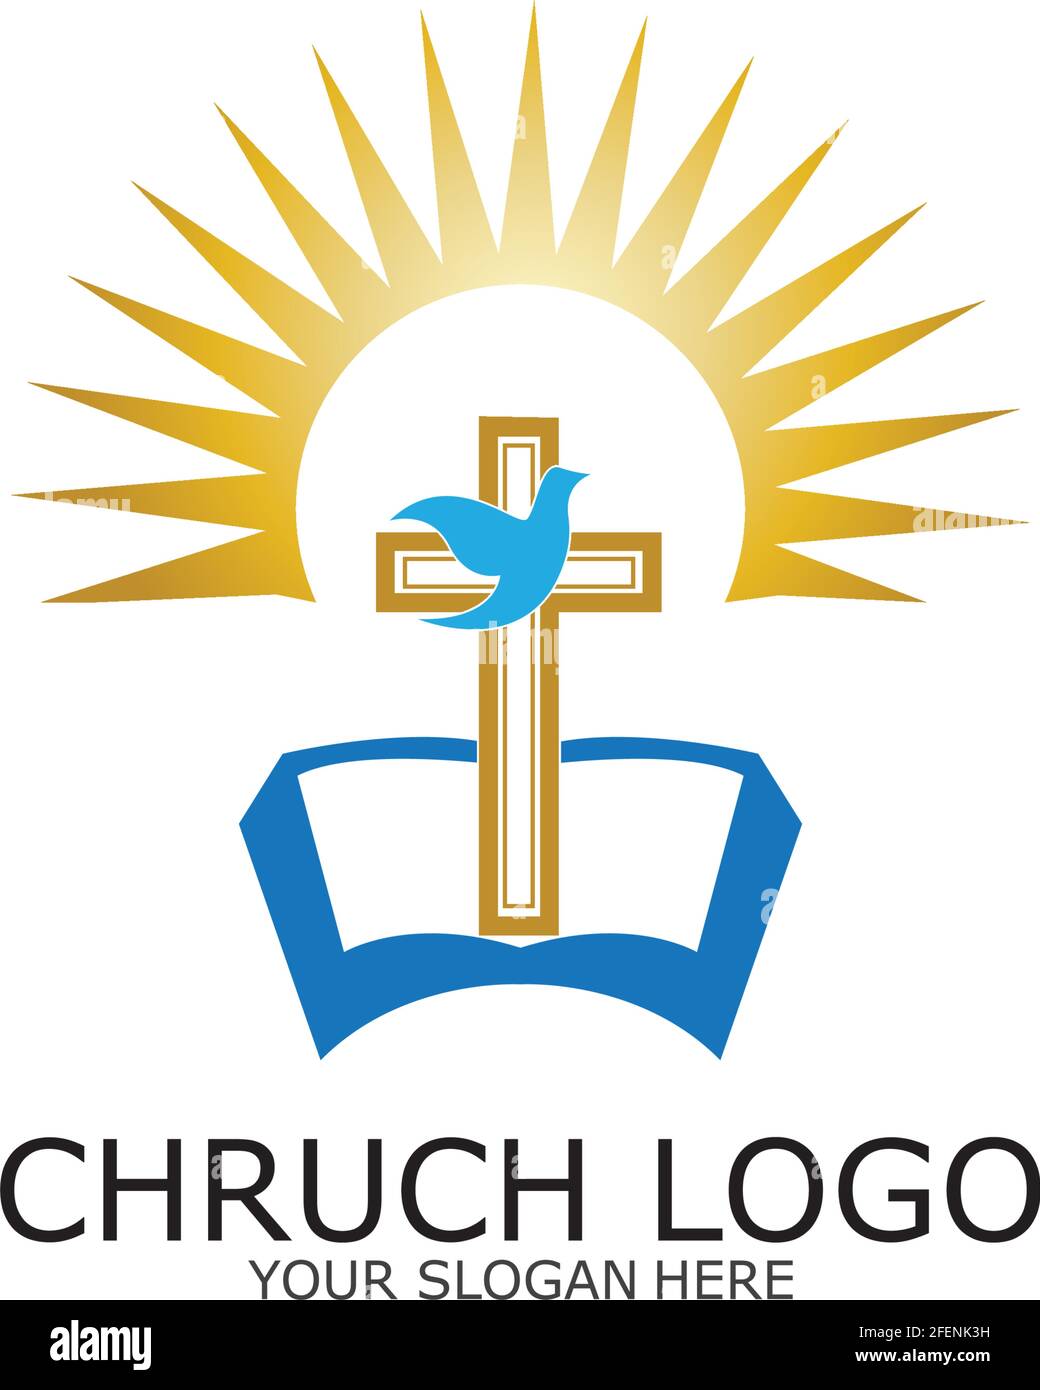 logo church.christian symbol,the bible and the cross of jesus christ ...